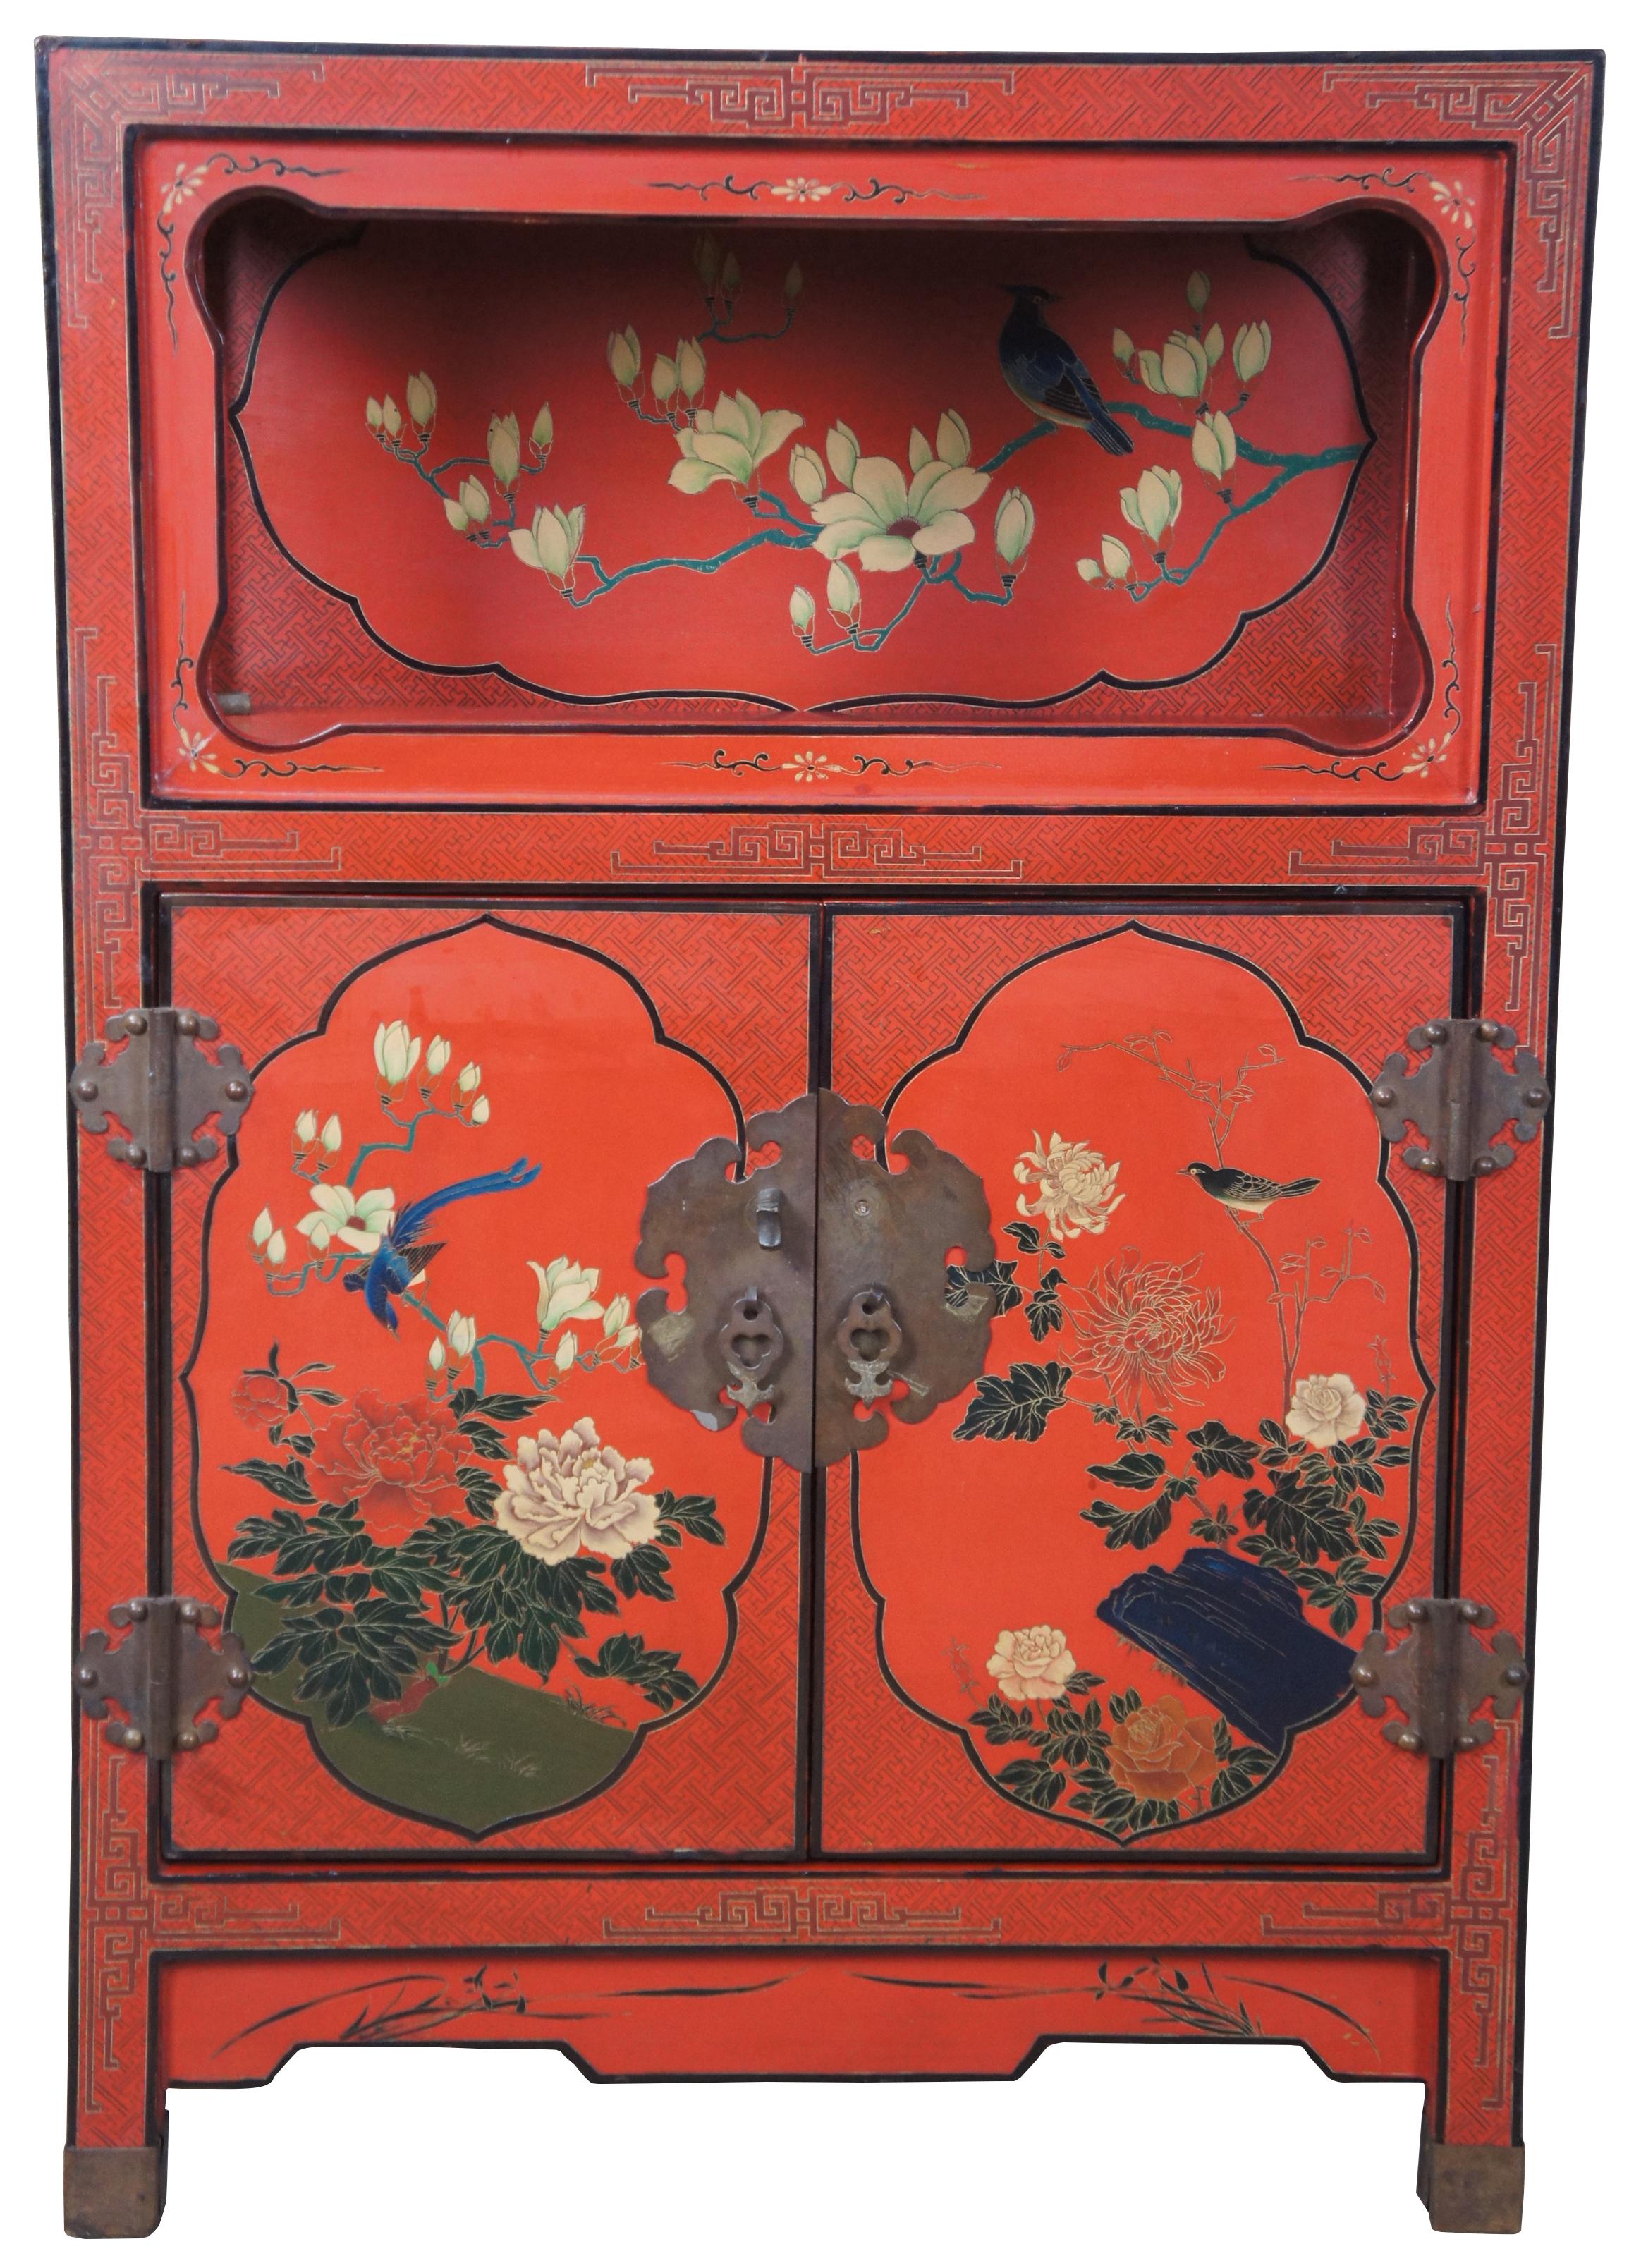 Late 20th century Chinese red lacquer entryway cabinet or stand. Features a beautiful oriental motif showing birds and various flowers. Features a unique open shelf over cabinet.
        